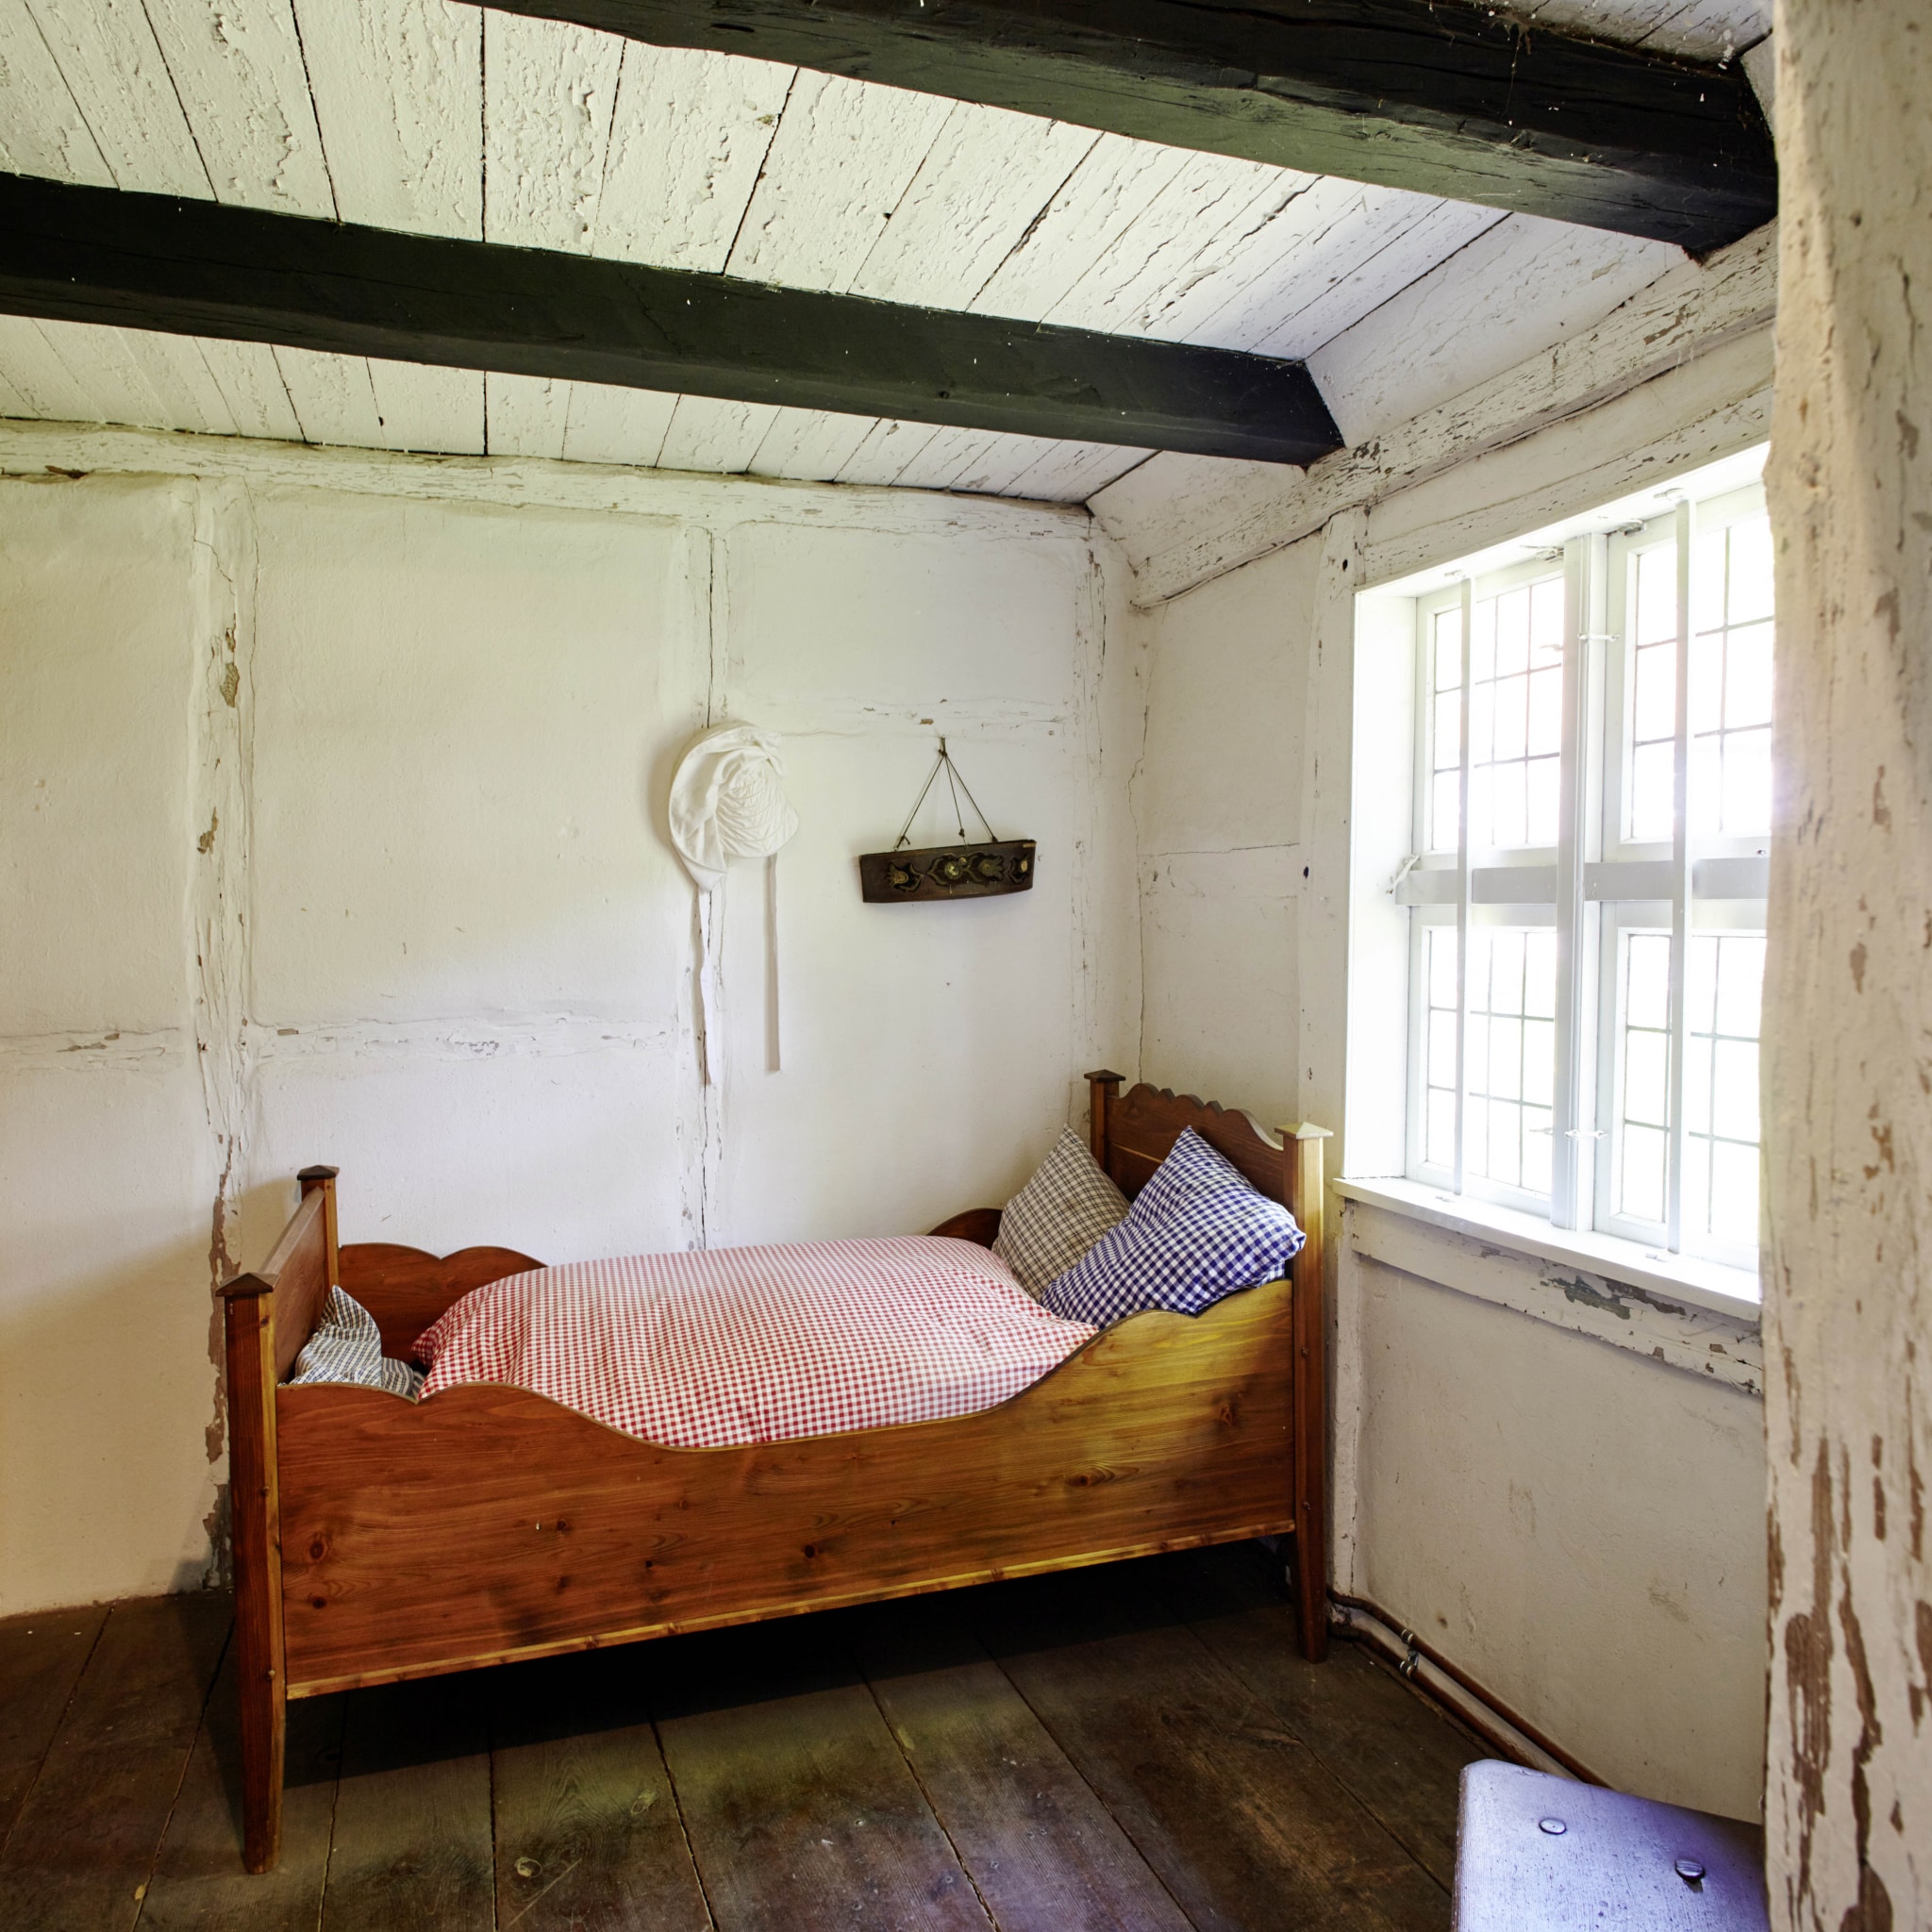 Inside view of the maid's chamber in the heath museum | Photo: Christian Burmester